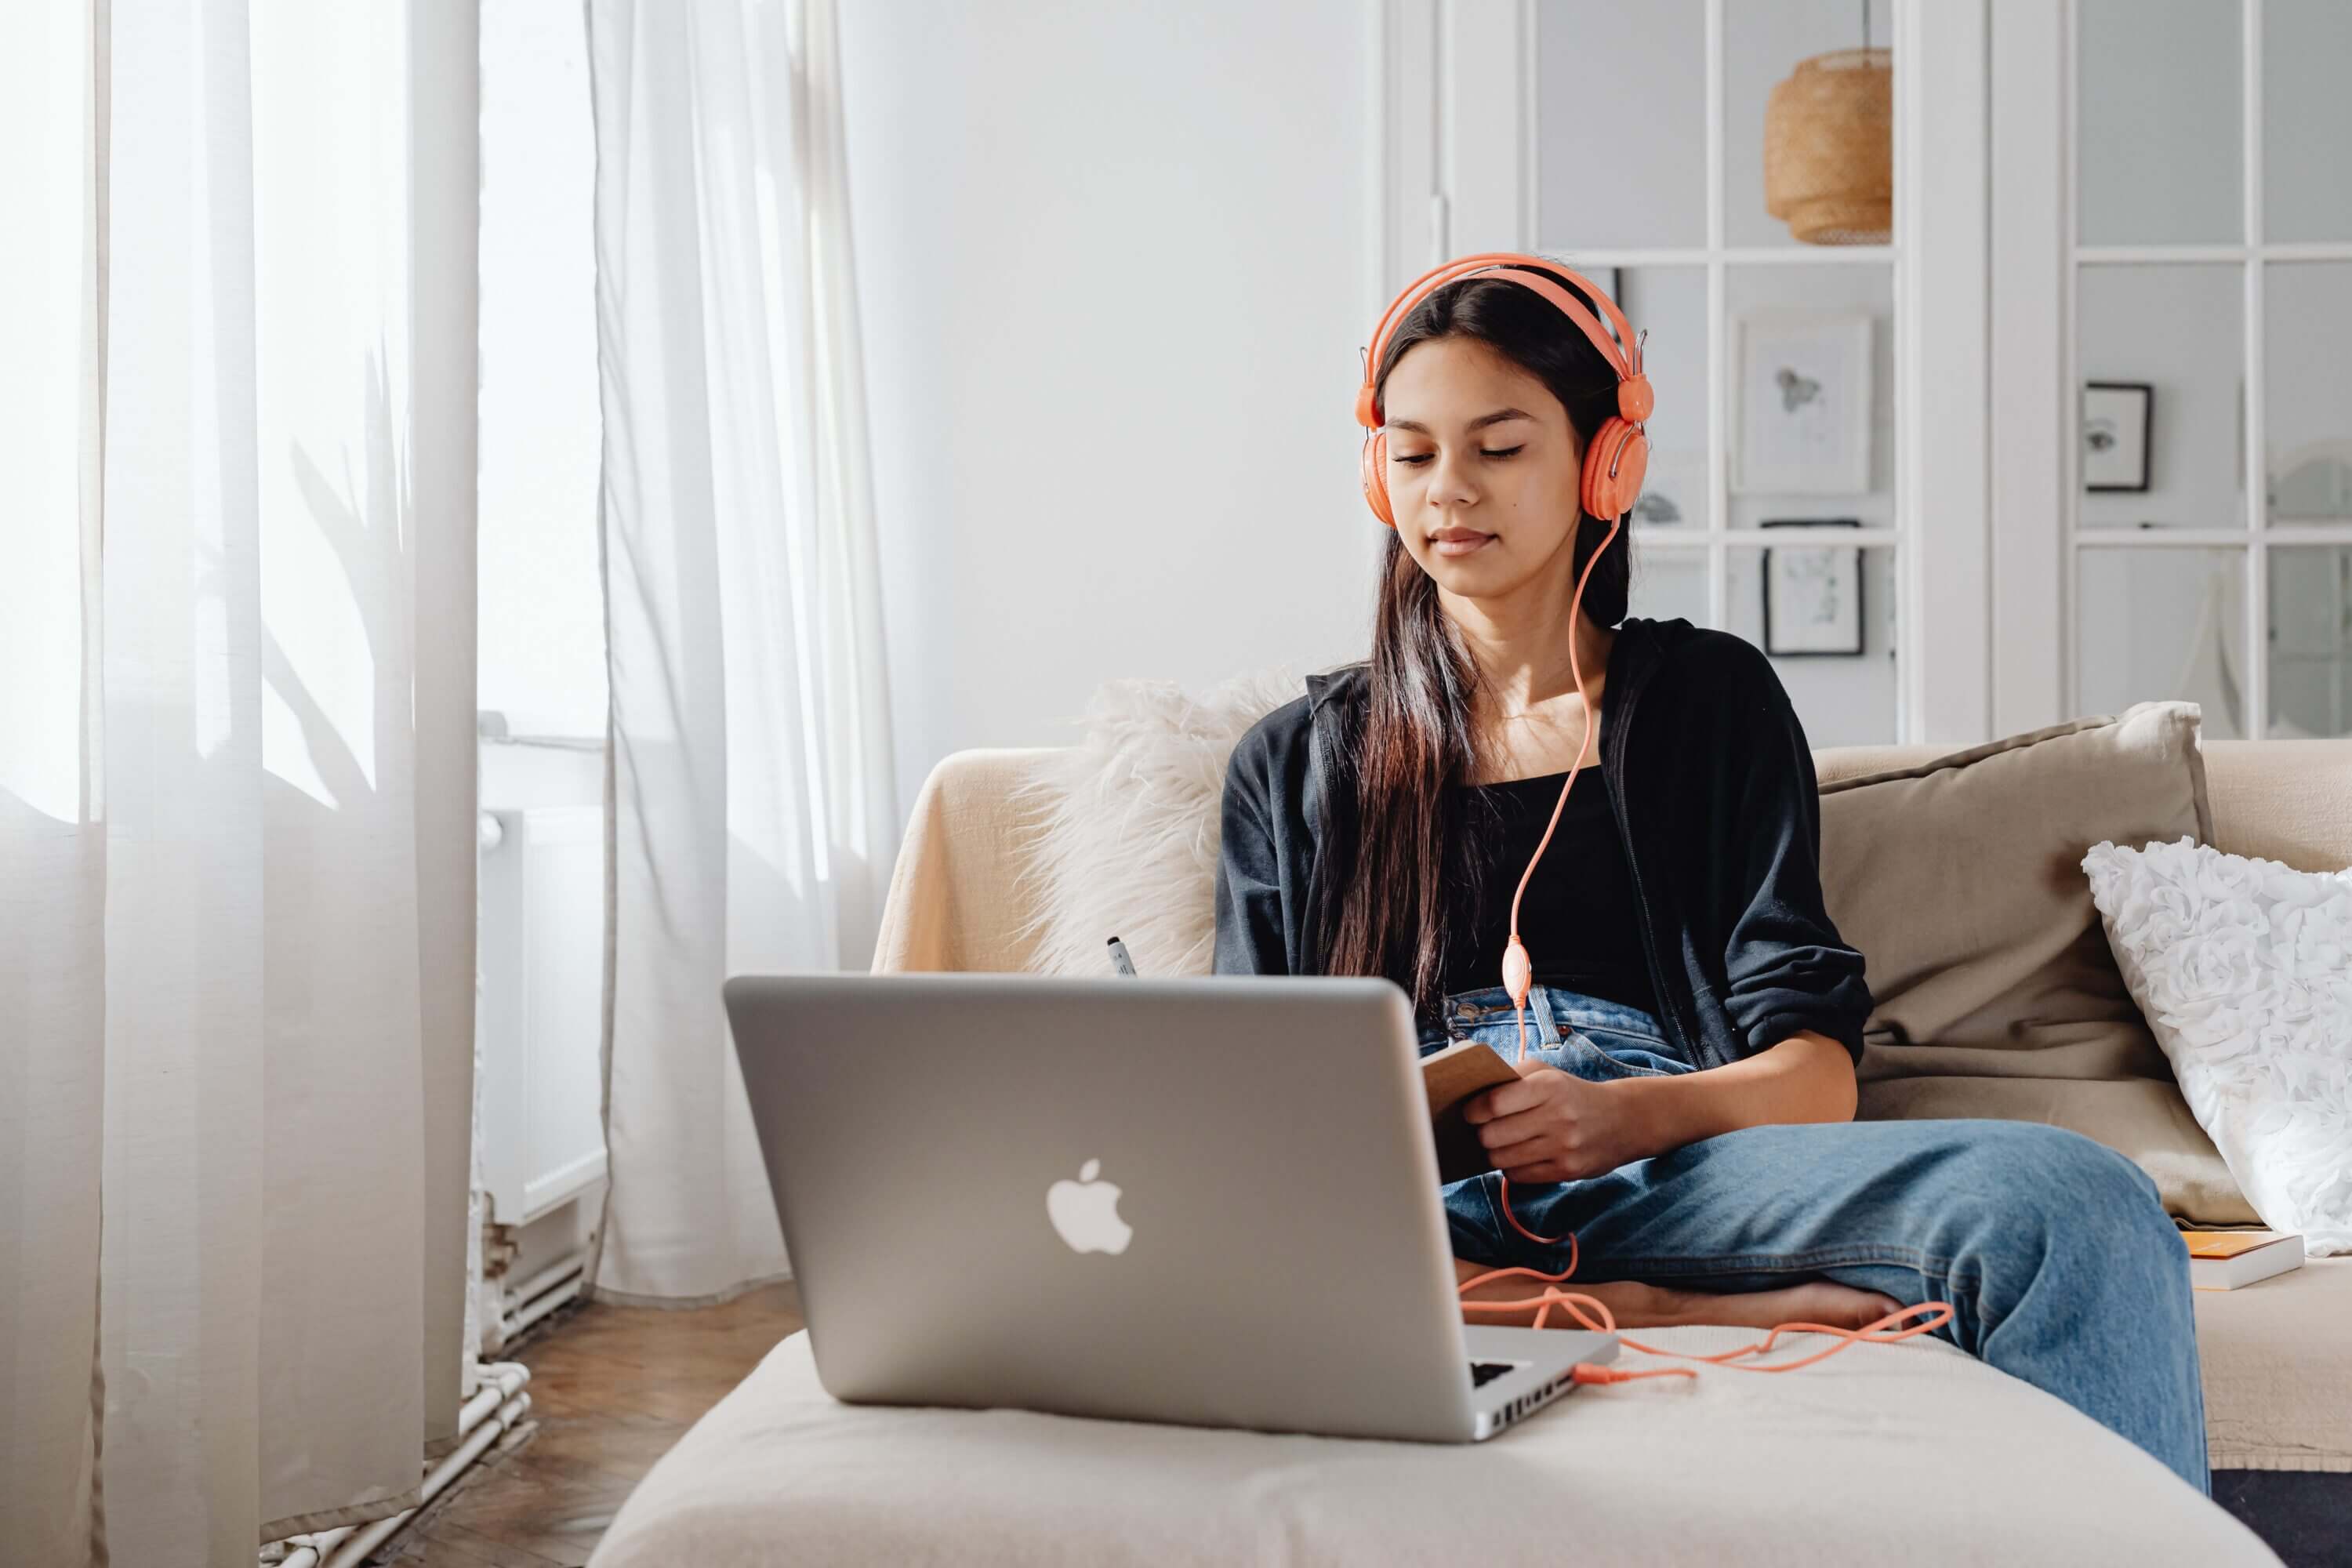 A girl wears headphones while she works at her laptop on her online school.